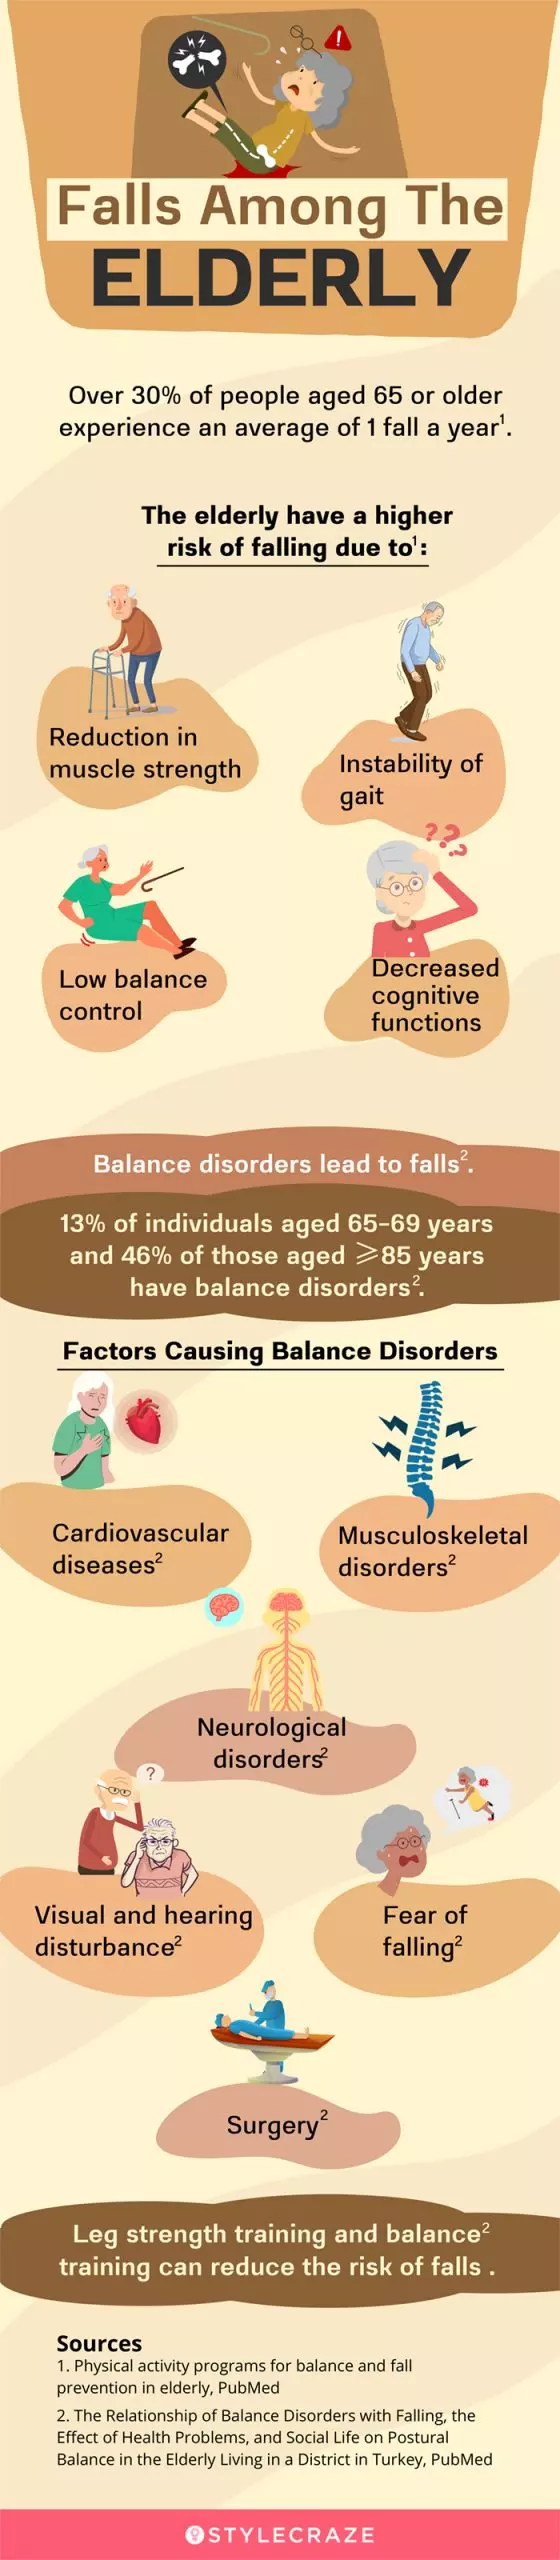 falls among the elderly (infographic)